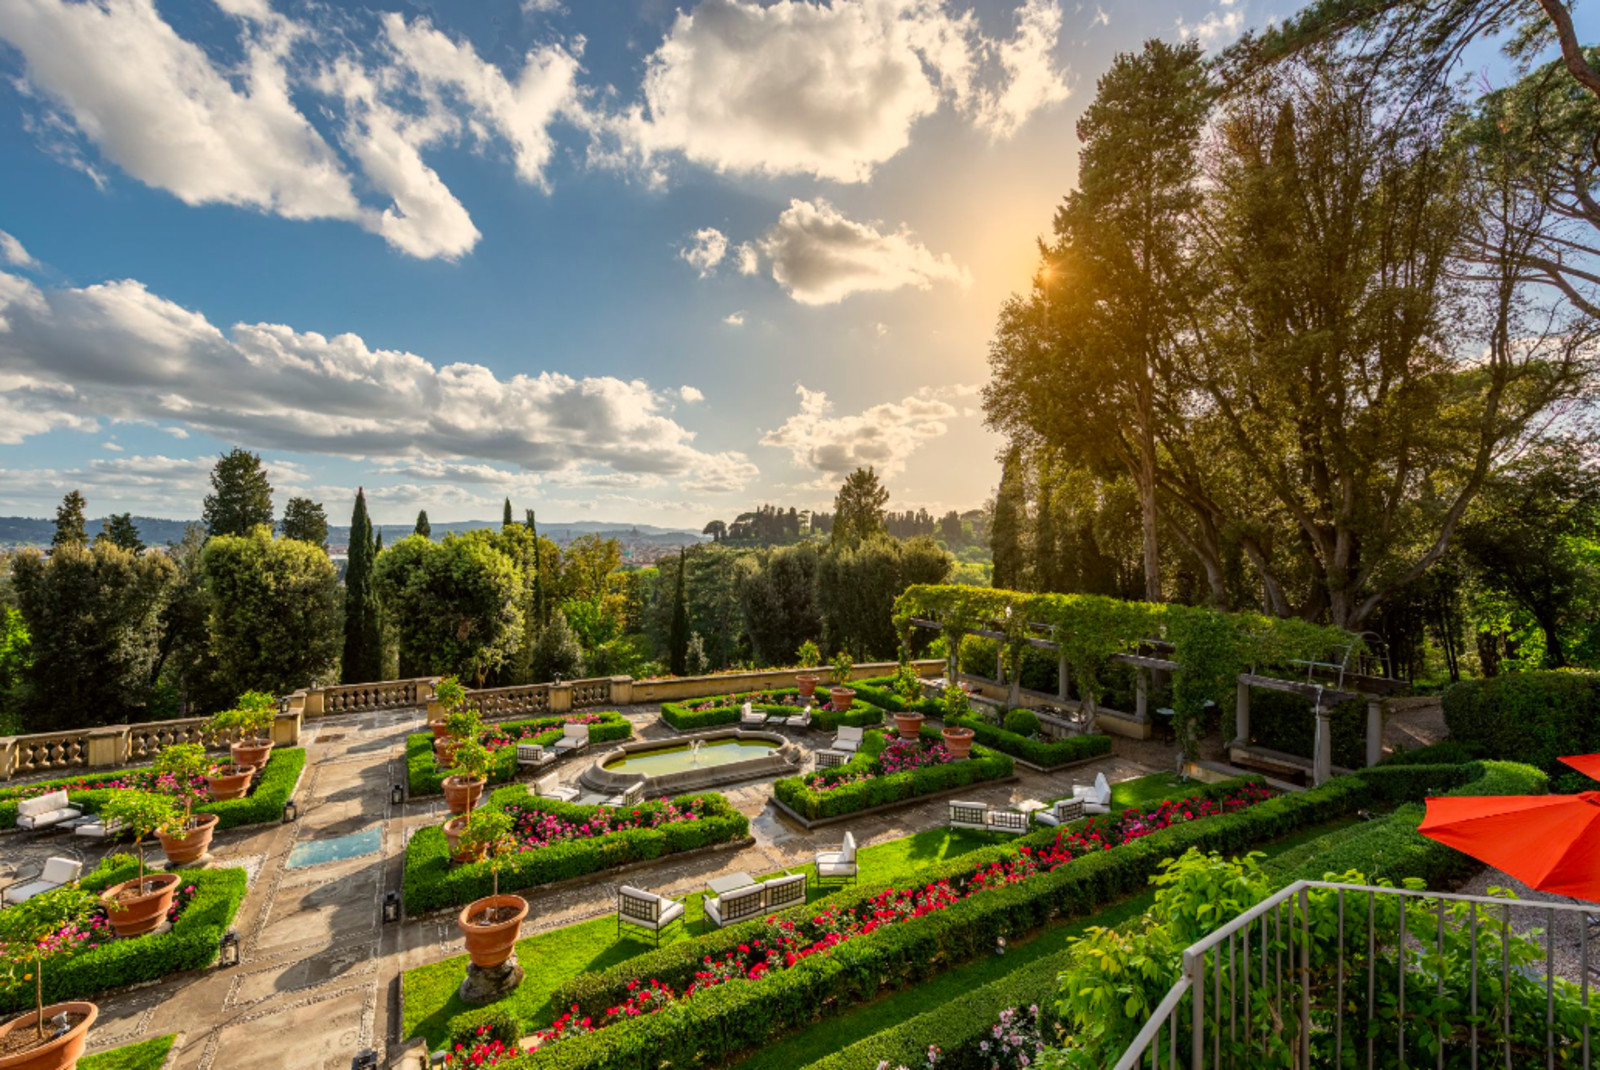 Gardens surrounded by trees with clouds in the sky during daytime